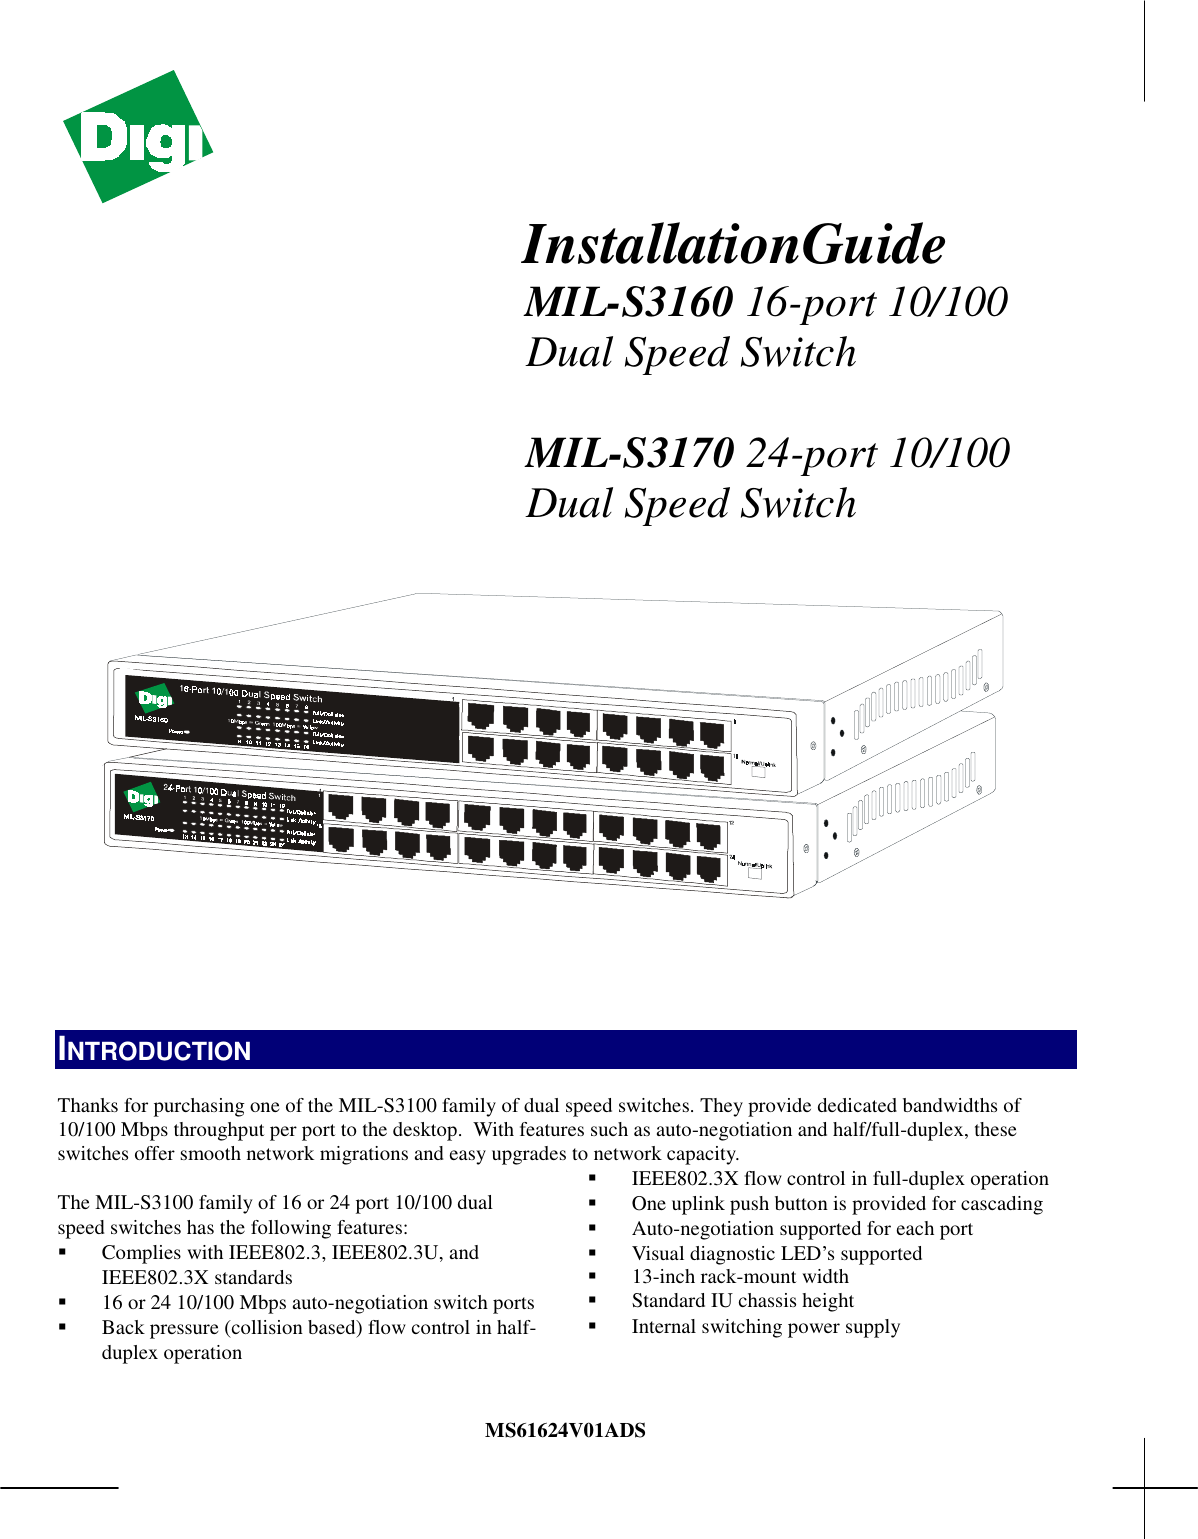 Page 1 of 6 - Digi Digi-Mil-S3160-Users-Manual- Congratulations On Your Purchase Of A 8/16-port Dual Speed Hub  Digi-mil-s3160-users-manual